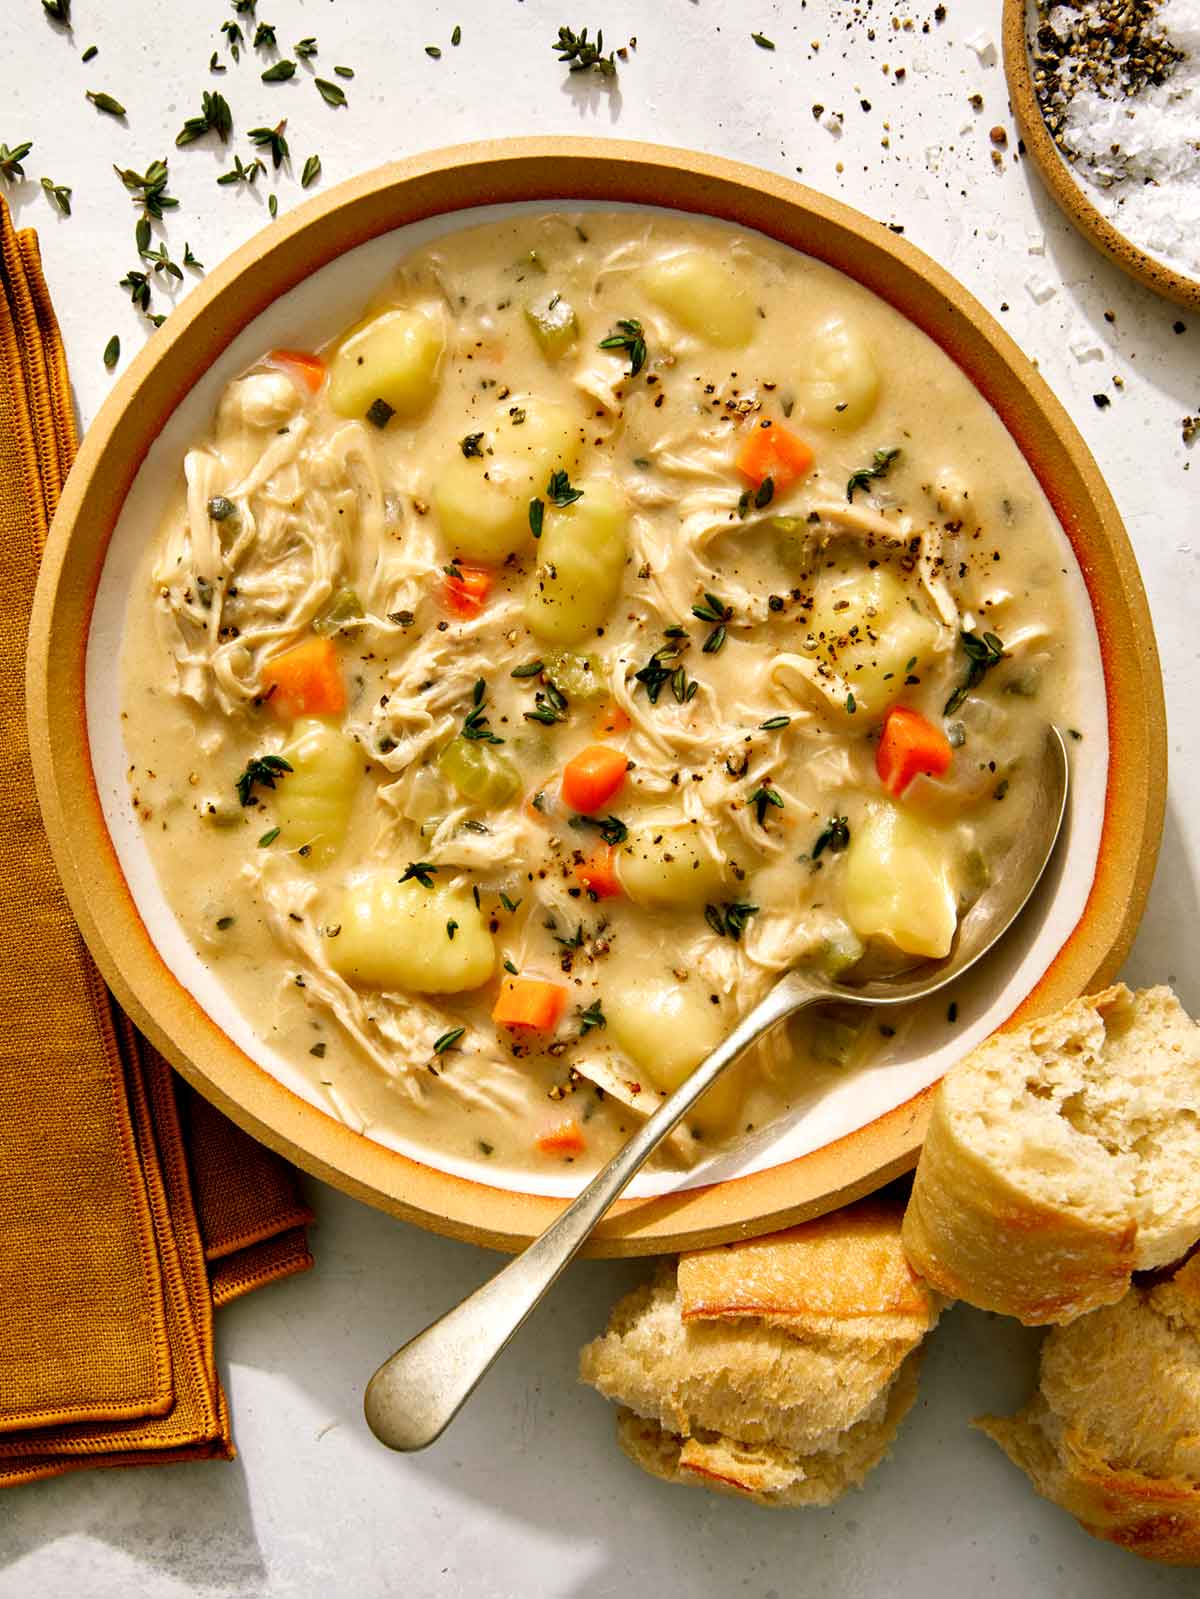 Chicken and gnocchi soup recipe with thyme. 